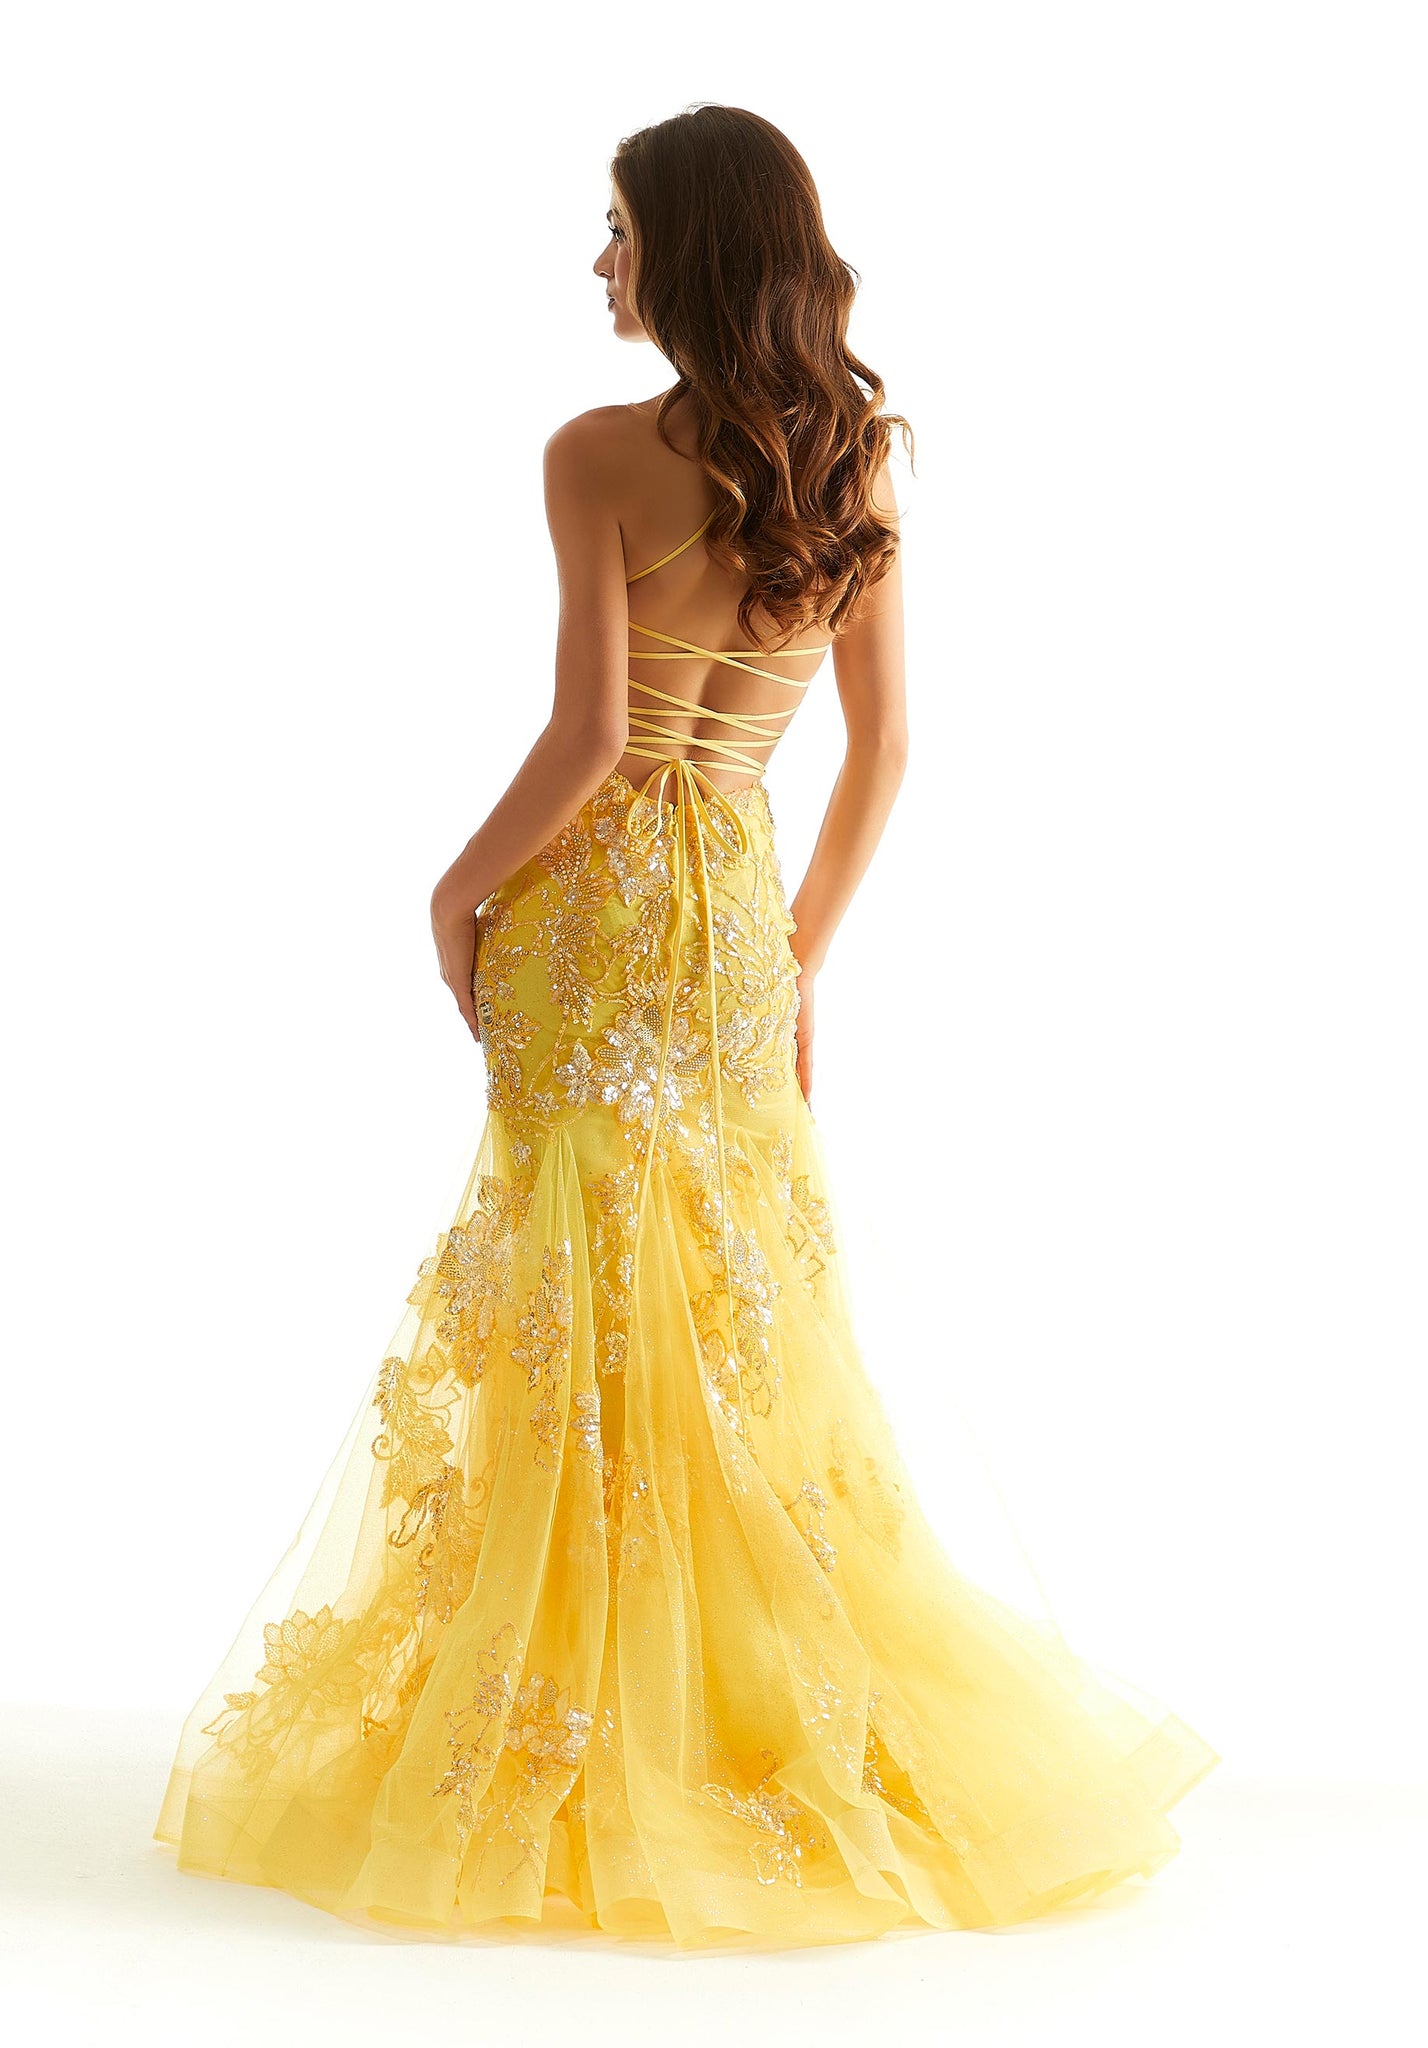 Make a lasting impression in this gorgeous Morilee mermaid dress 48029. This sheer illusion bodice has a scoop style neckline with thin shoulder straps that turn into an adjustable criss cross over your open back. The stunning floral appliques are adorn with sparkling beadwork. The mermaid style skirt trickles down those appliques completing this ultra glam look.